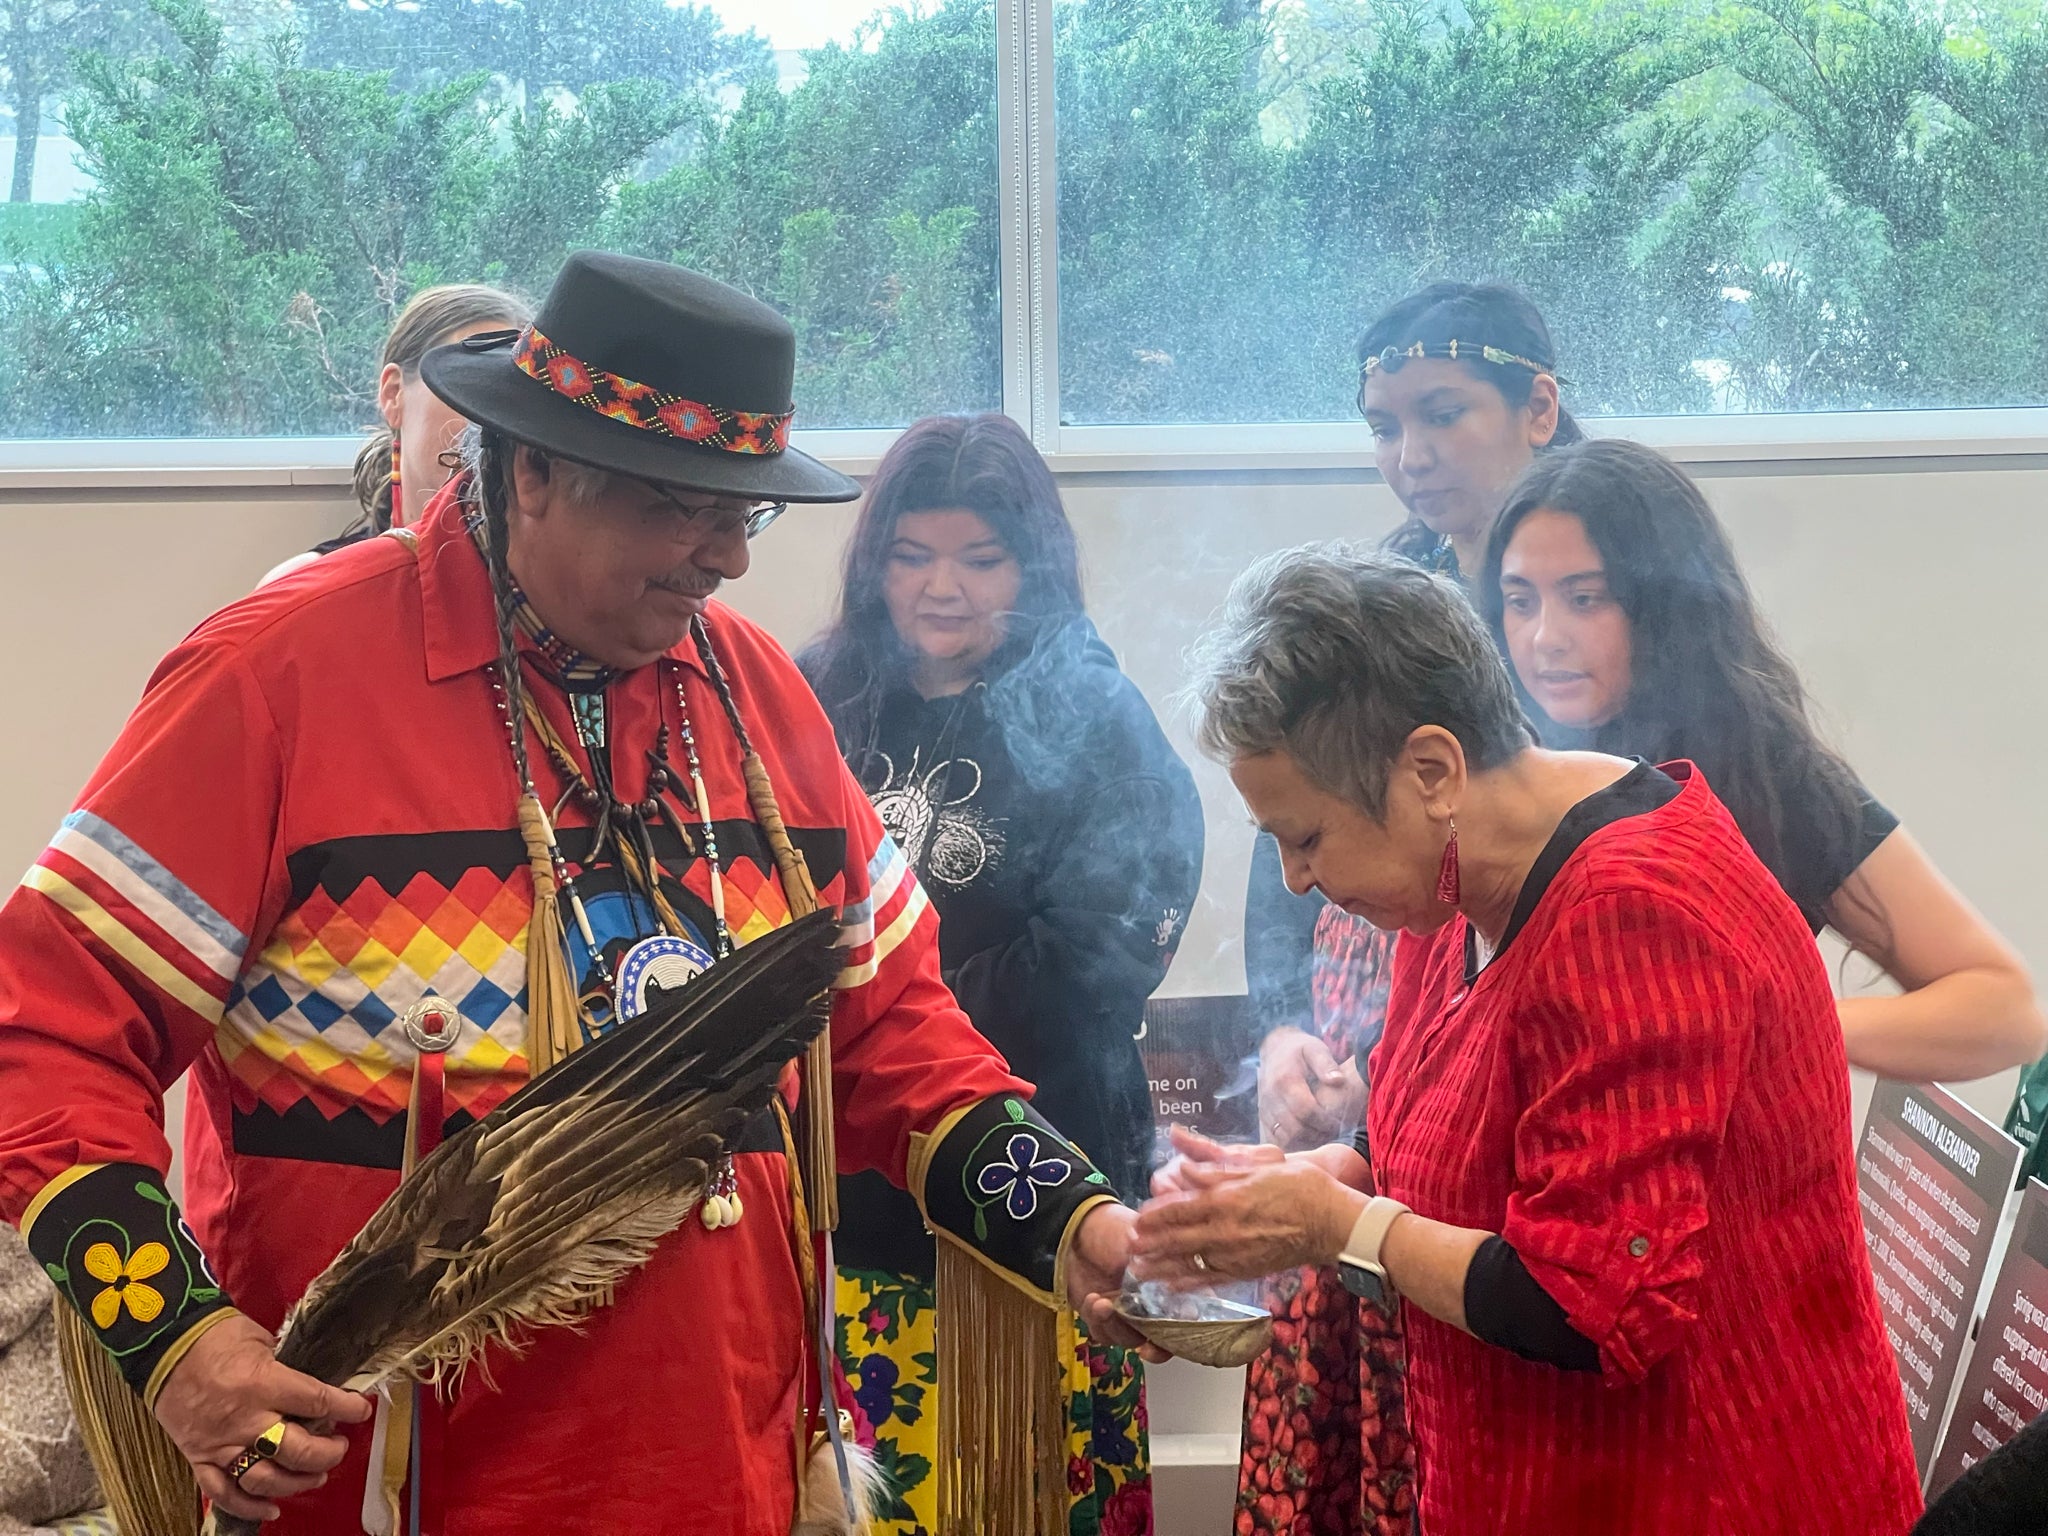 Elder Myeengun Henry, Jean Becker and other members of the Indigenous community gather for smudging on Red Dress Day